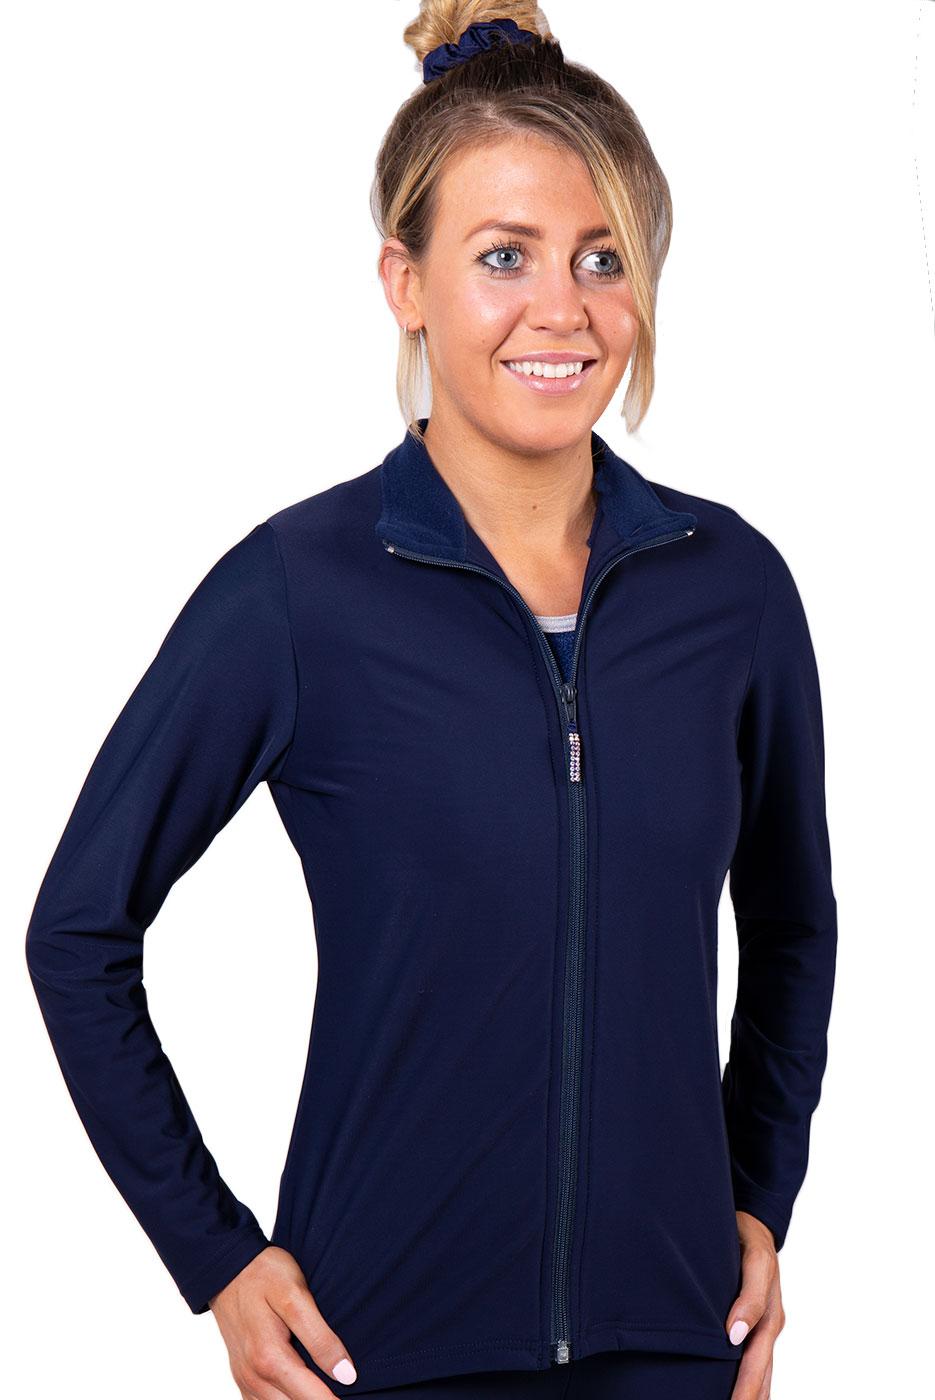 TS6 Tracksuit Jacket: Female in Navy - A Star Leotards